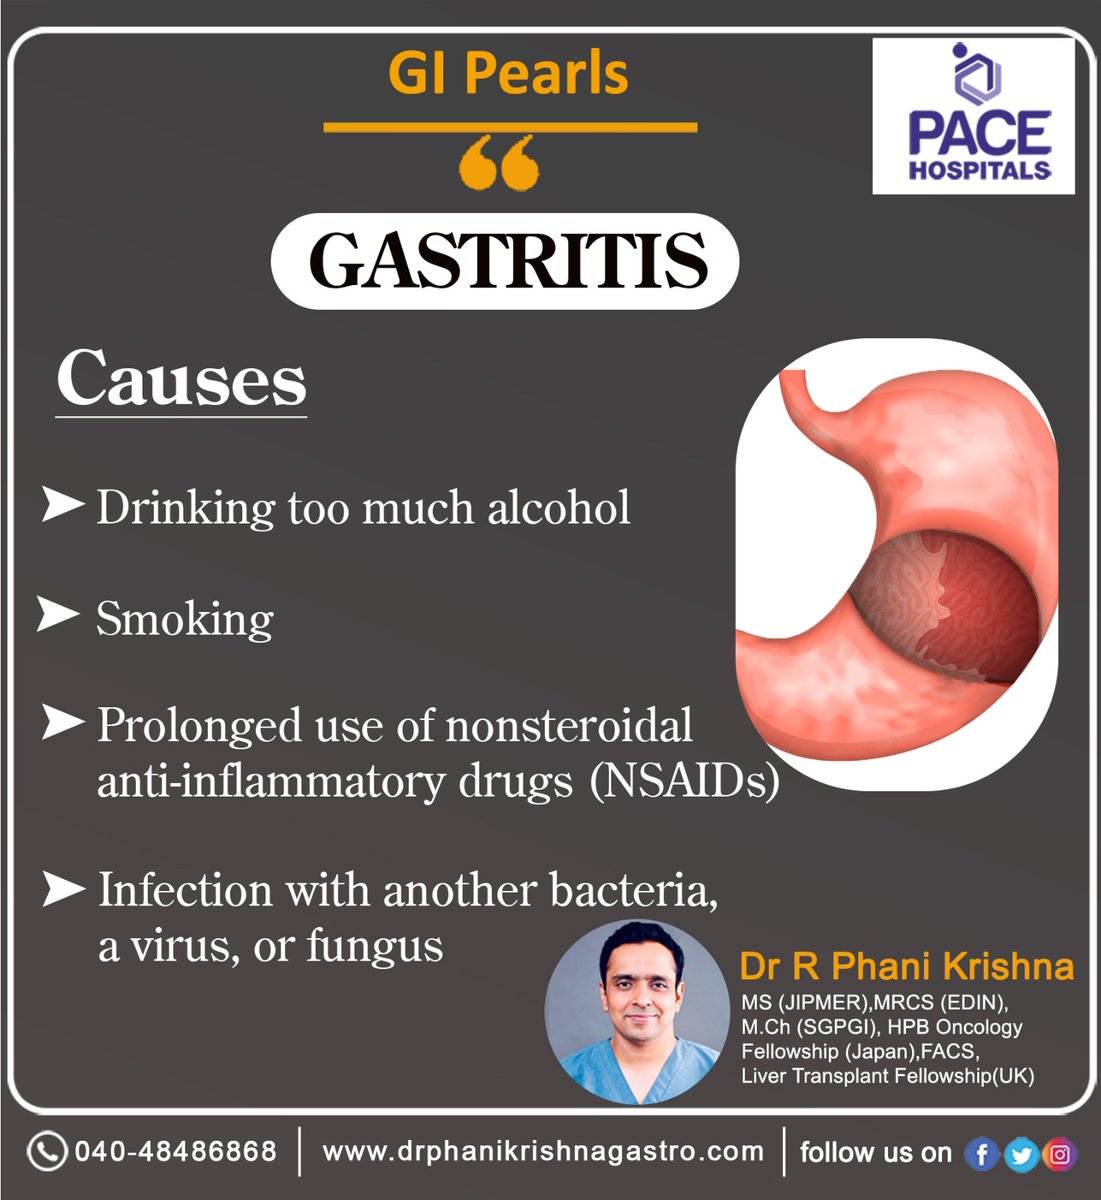 #Gastritis can be #caused by irritation due to #excessivealcoholuse, #chronicvomiting, #stress, or the use of certain #medications.
#drphanikrishnaRavula #surgicalgastroenterologist #Liverproblems #laparoscopicsurgery #gastrodoctor #gastroclinic #besttreatment #besthealthcare